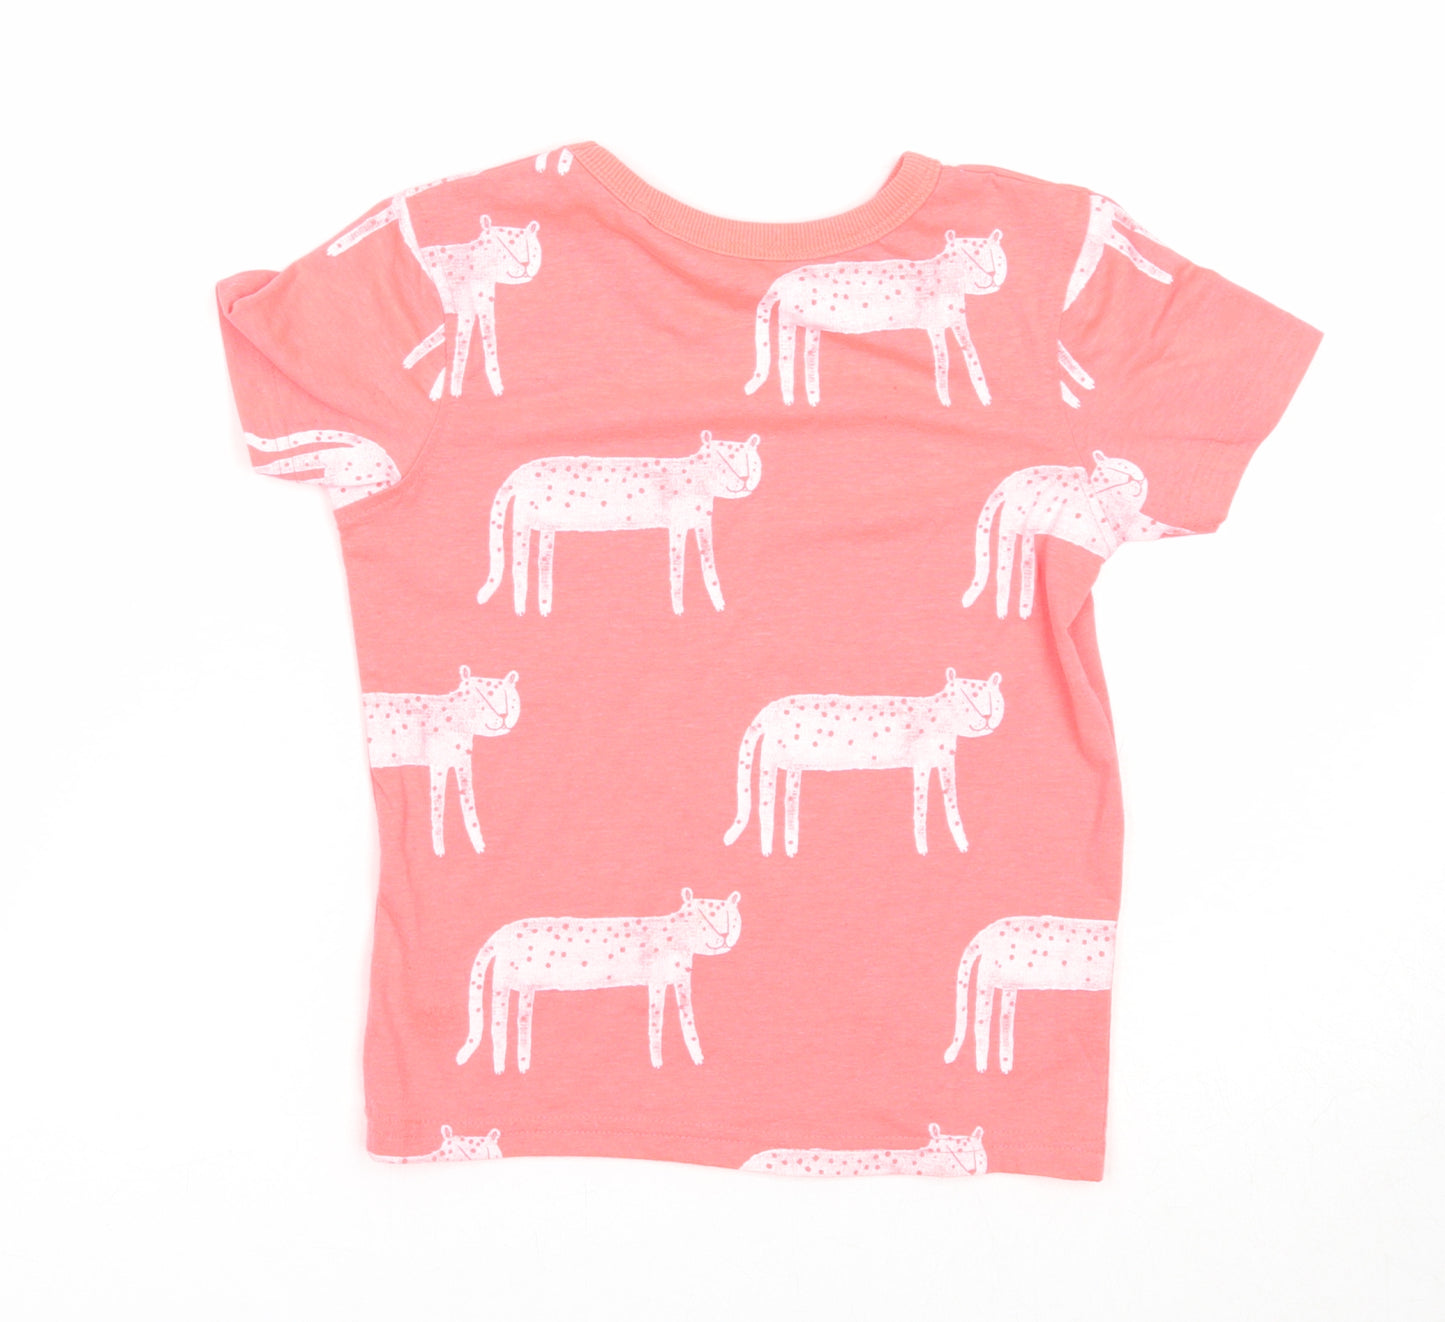 Preworn Boys Pink Geometric Polyester Basic T-Shirt Size 4-5 Years Round Neck Pullover